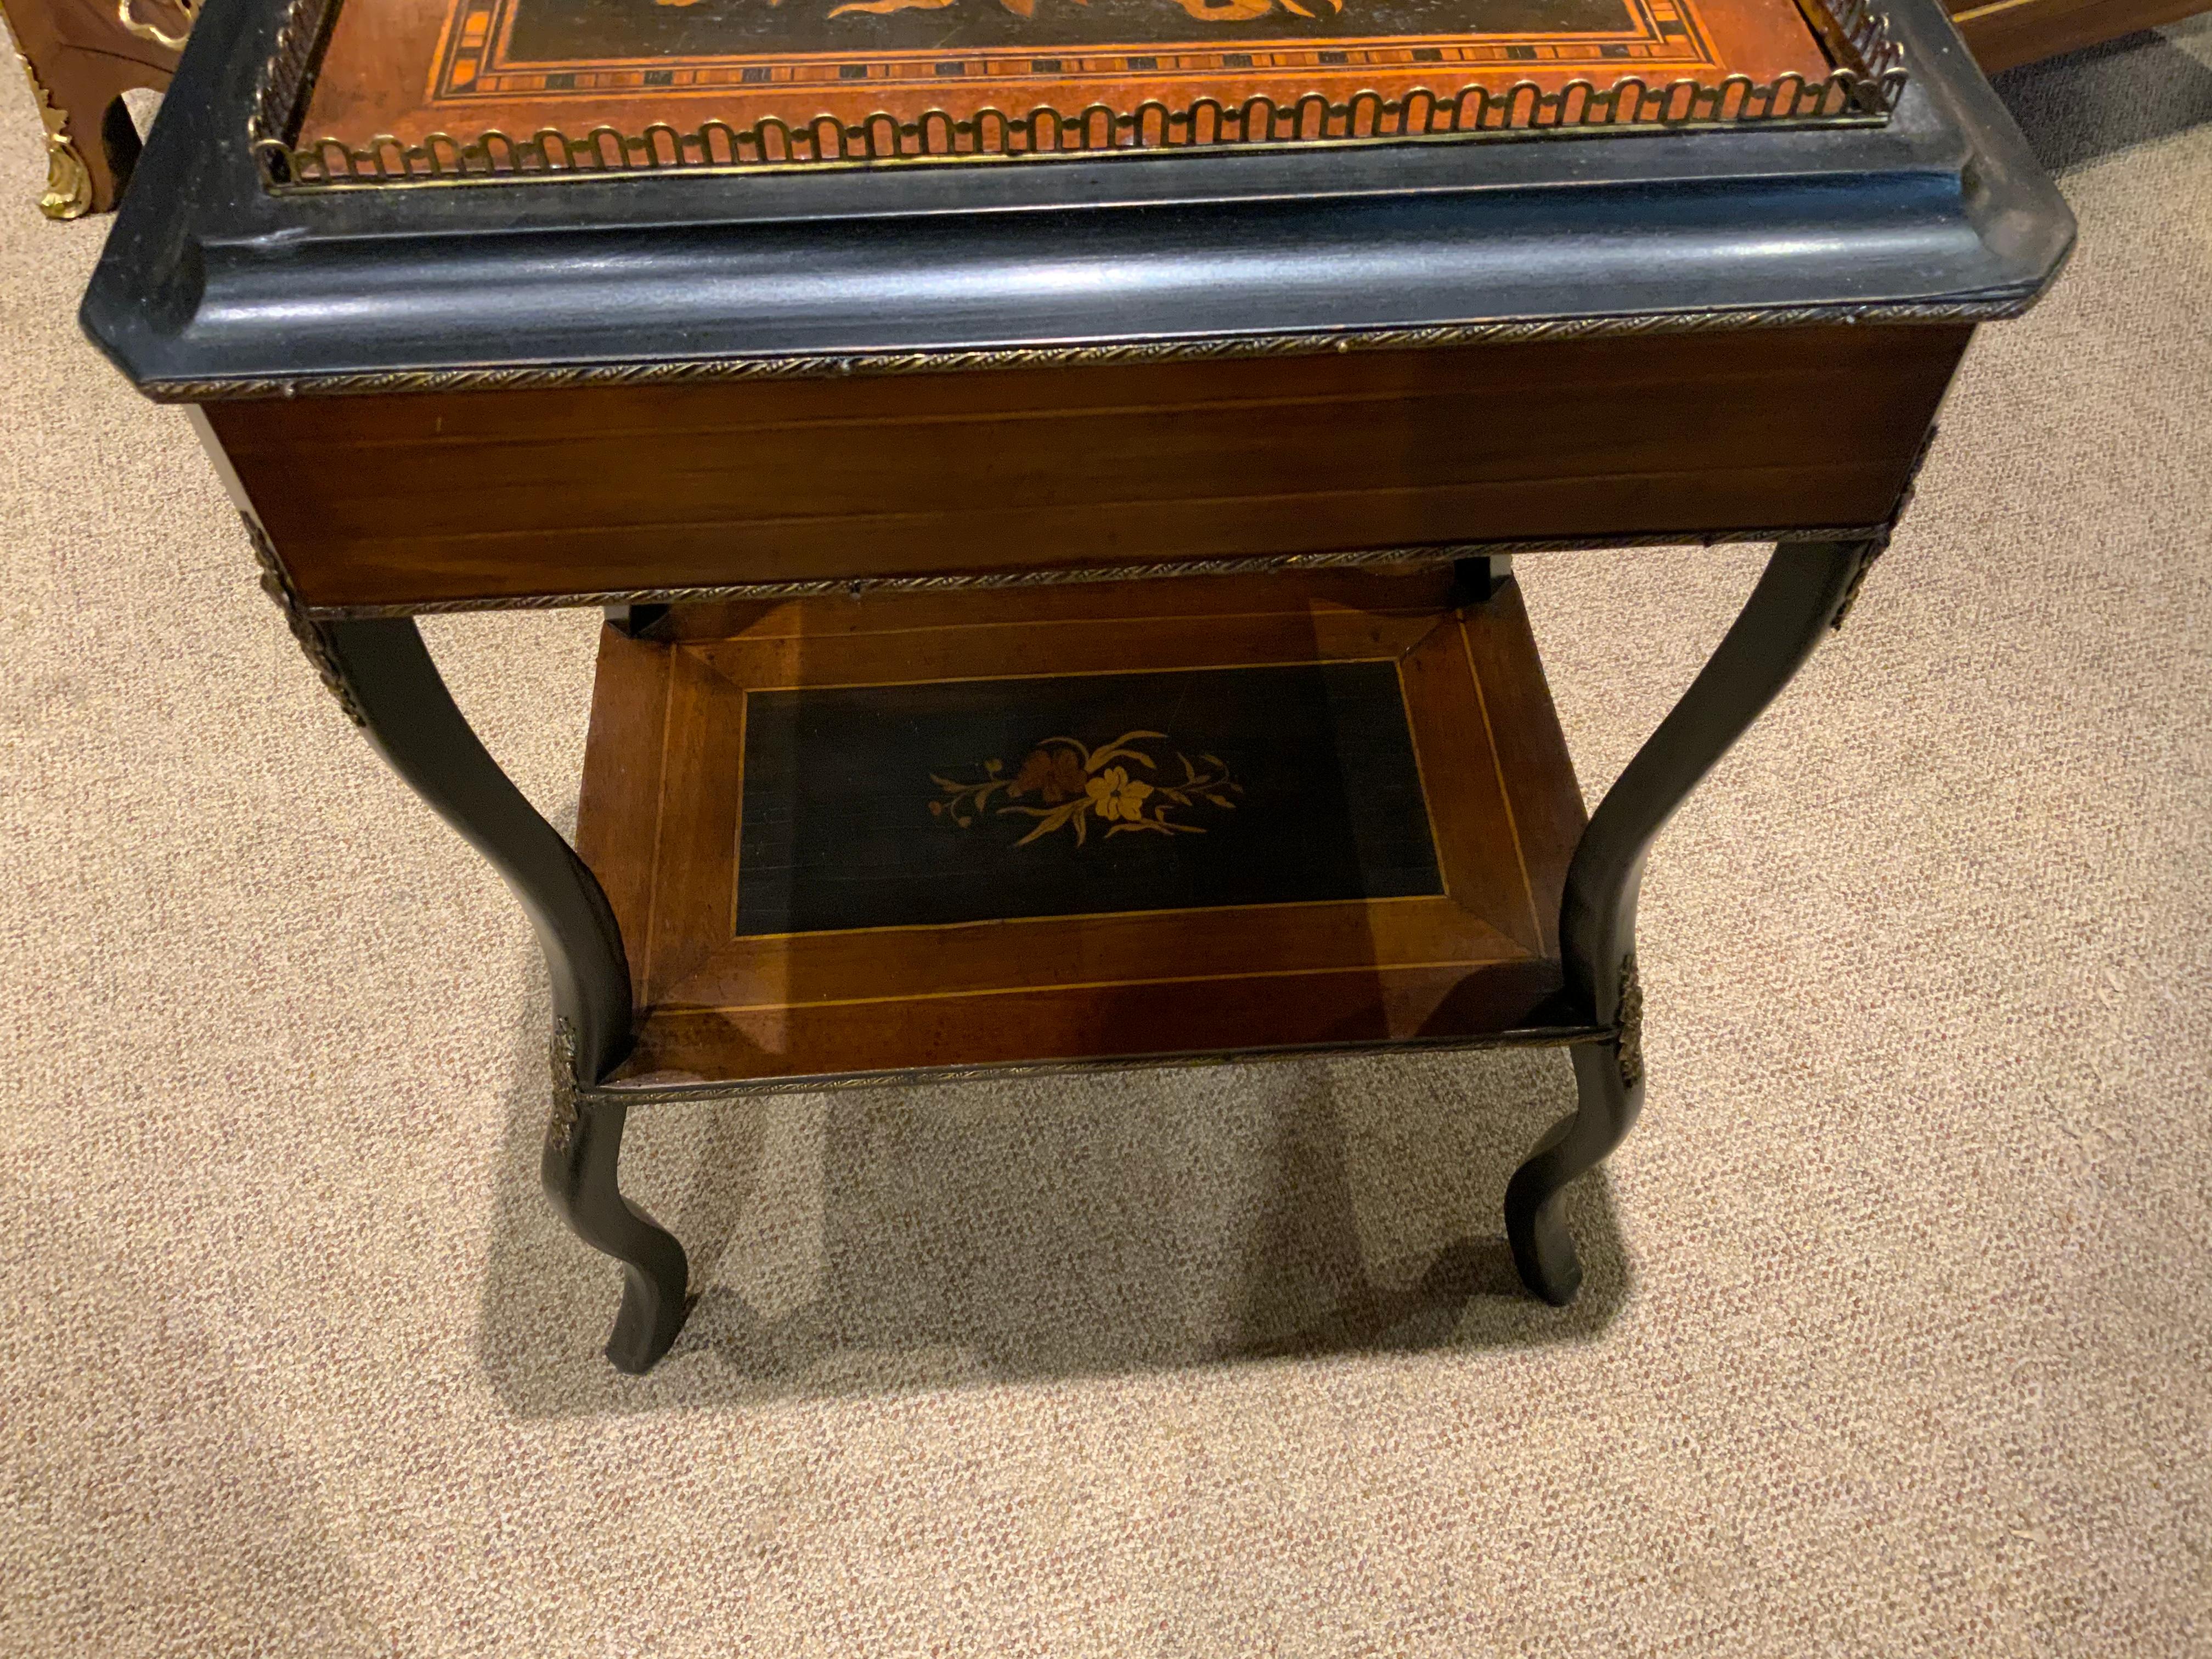 French occasional table made of rosewood and various other woods forming a beautiful 
Marquetry floral pattern in the center top with a bronze gallery encircling the top edge.